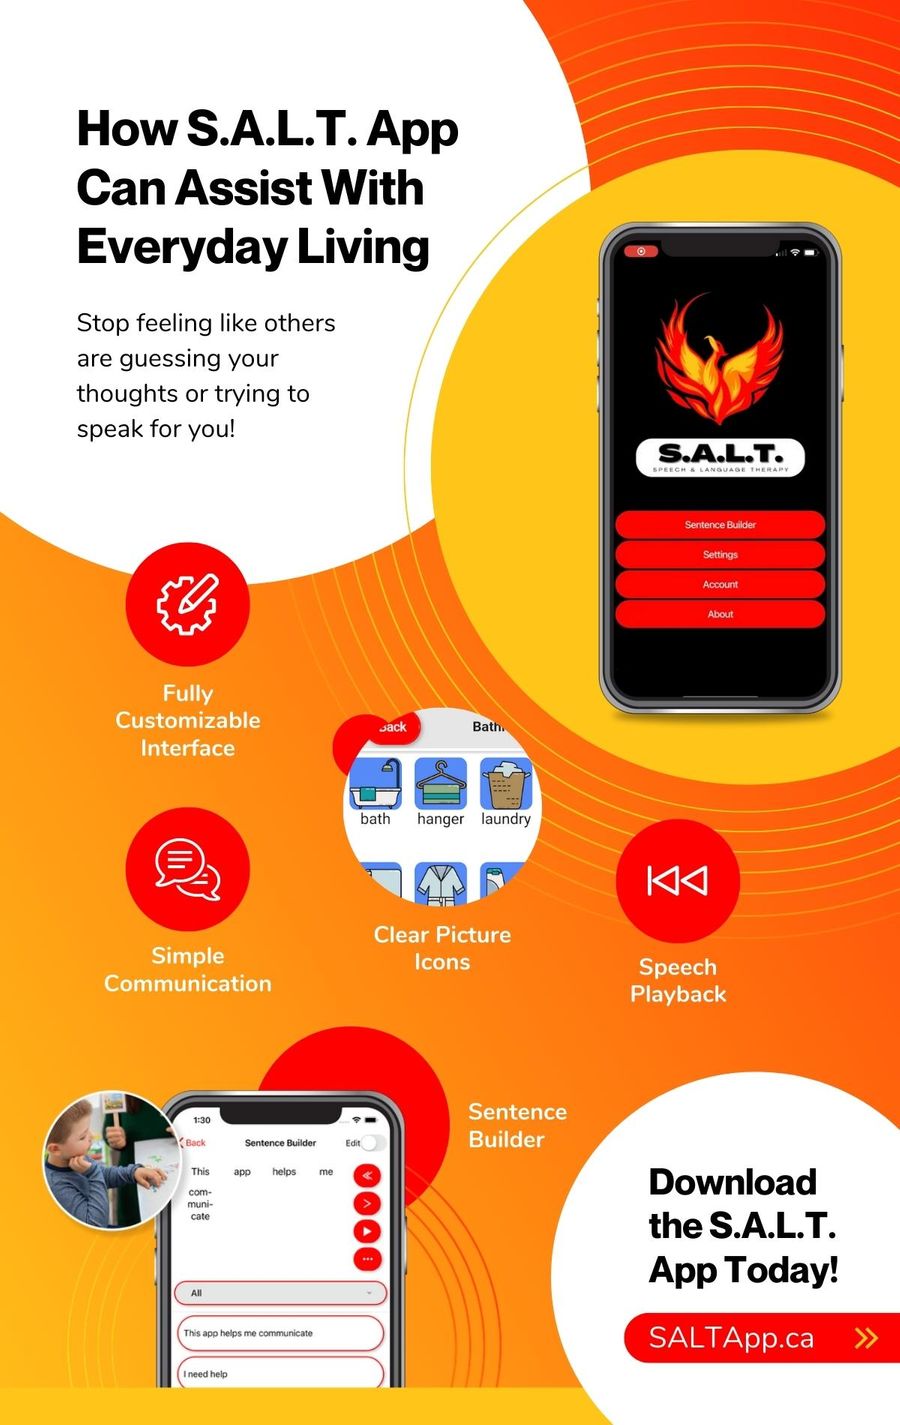 How S.A.L.T. App can assist with everyday living infographic